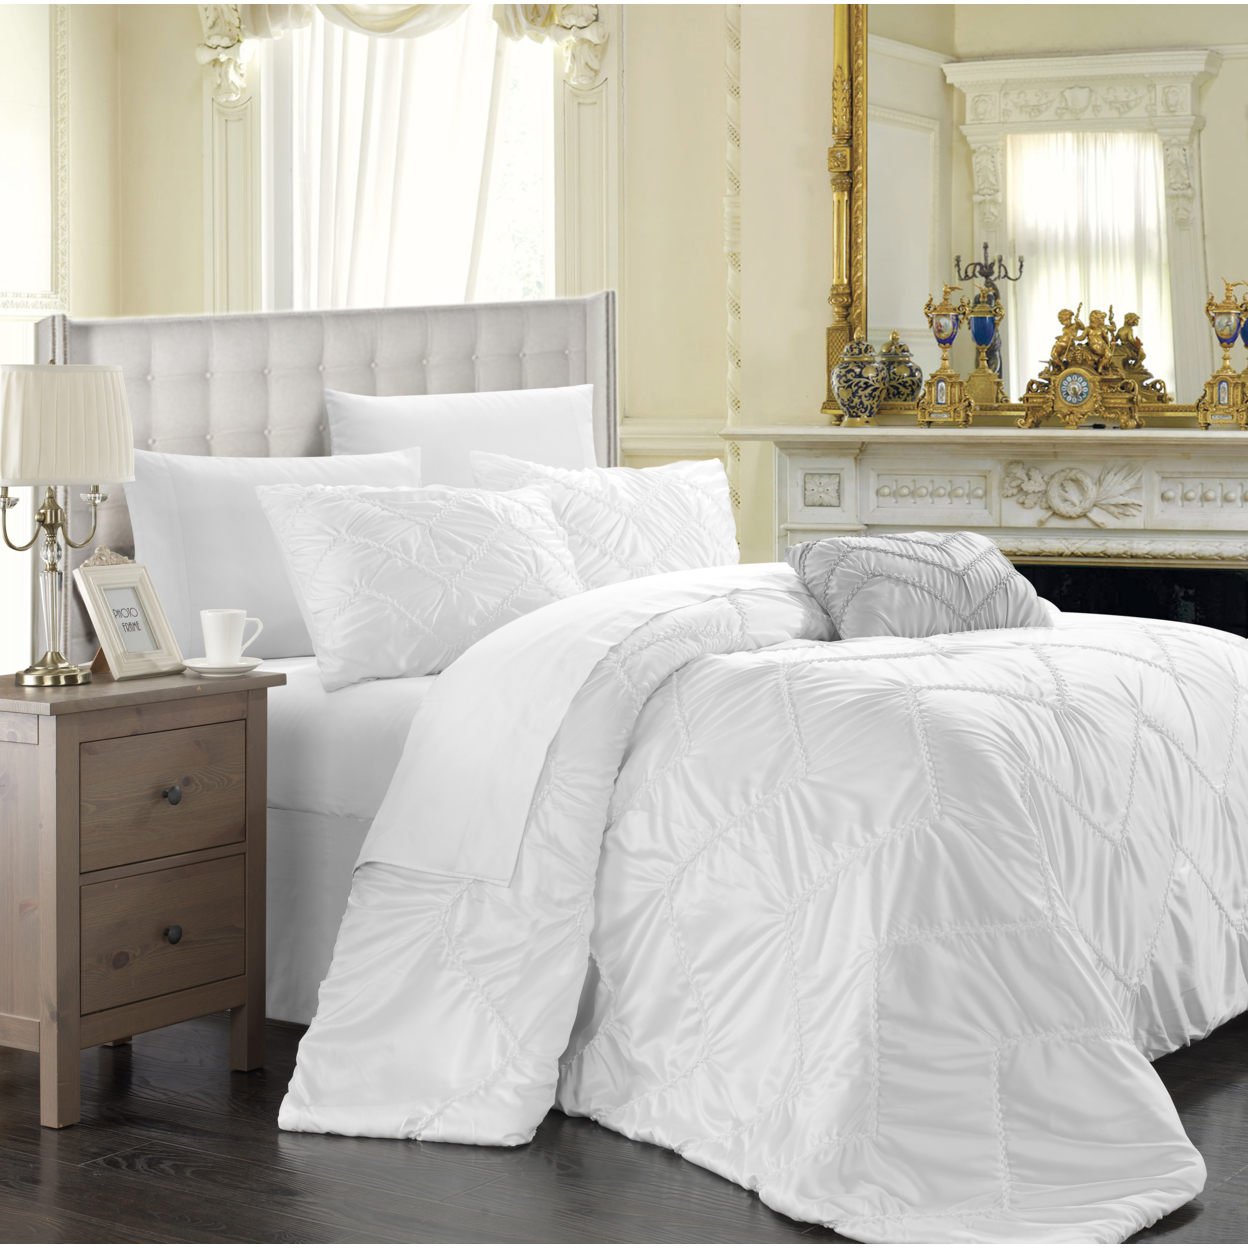 Chic Home Ella 4-piece Duvet Cover Set, Shams And Decorative Pillow Included - White, Queen